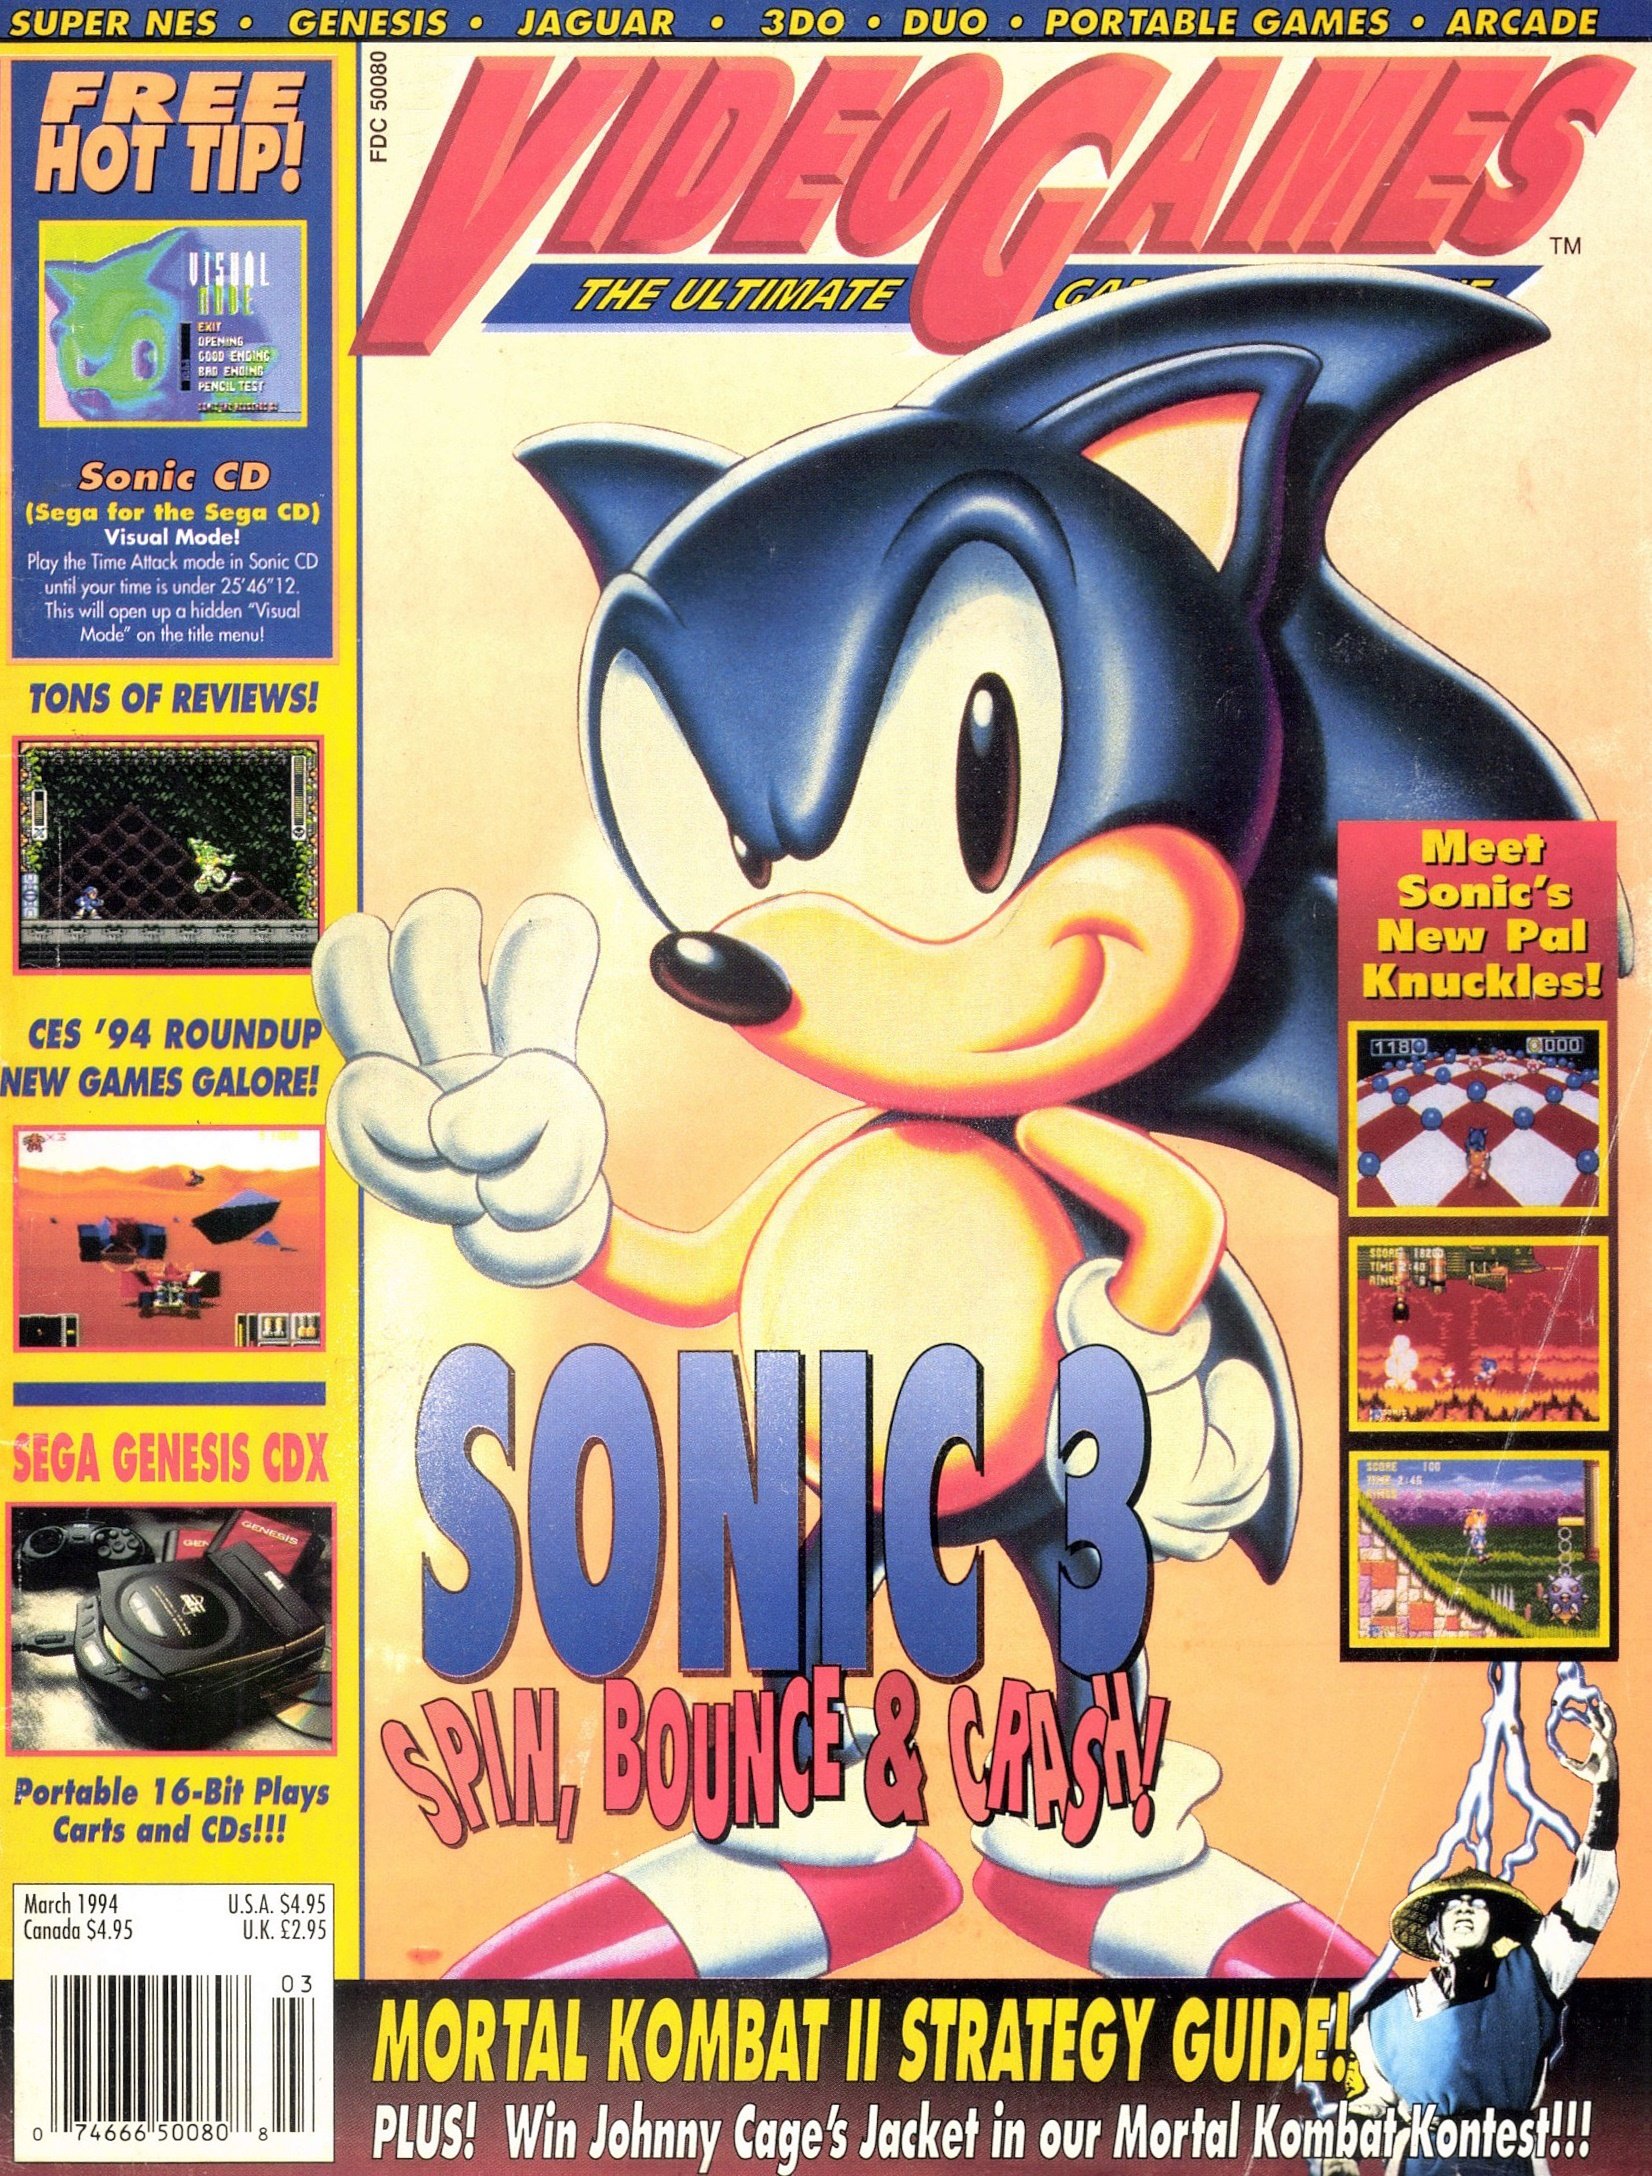 More information about "VideoGames The Ultimate Gaming Magazine Issue 62 (March 1994)"